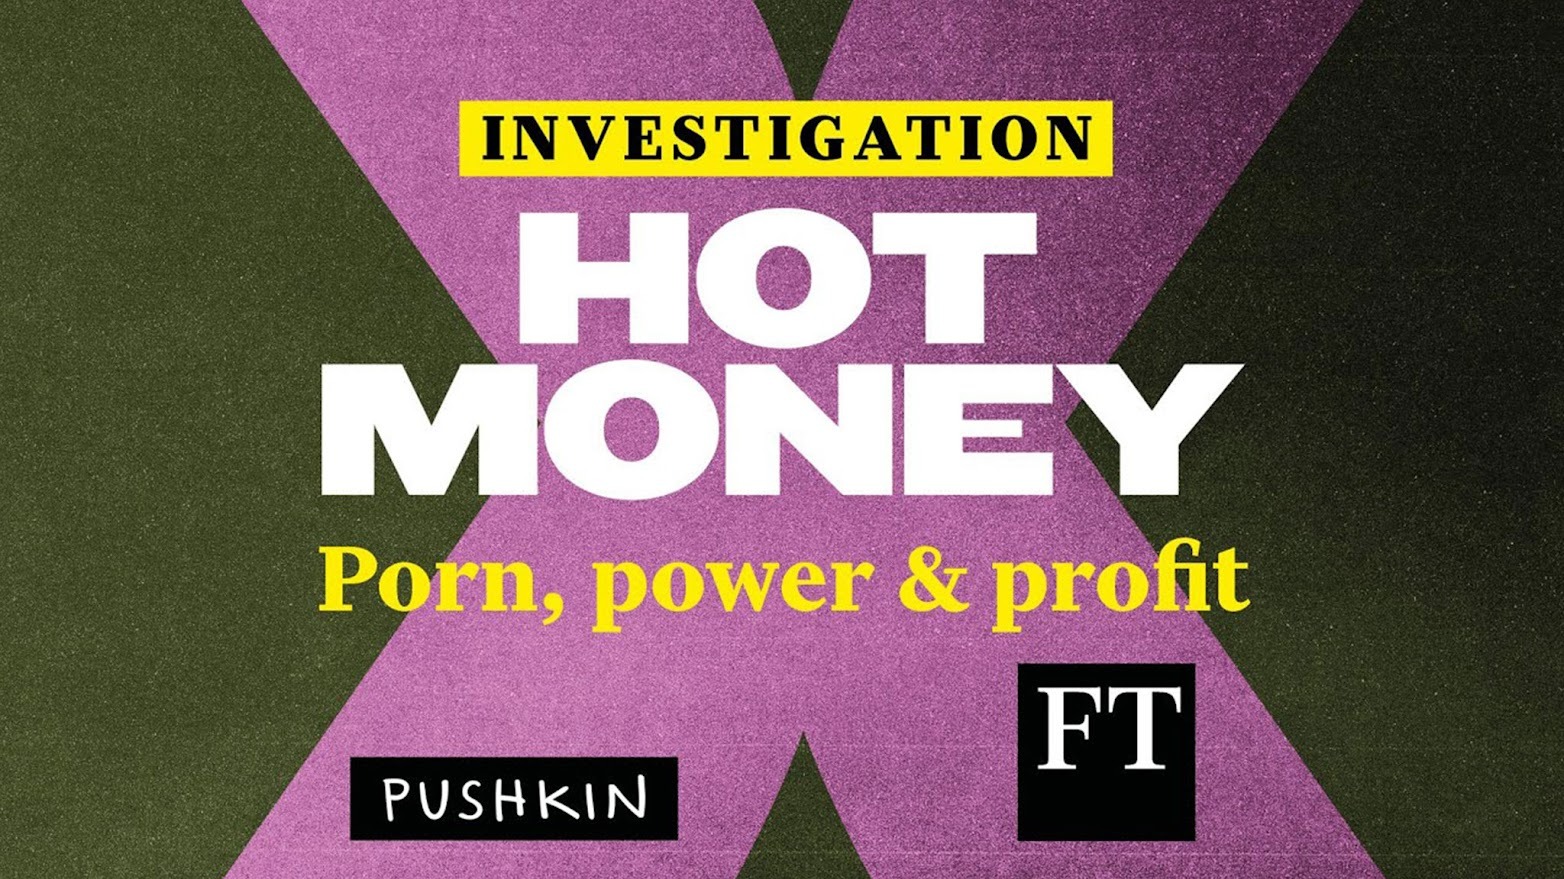 The billionaire who took down porn Financial Times